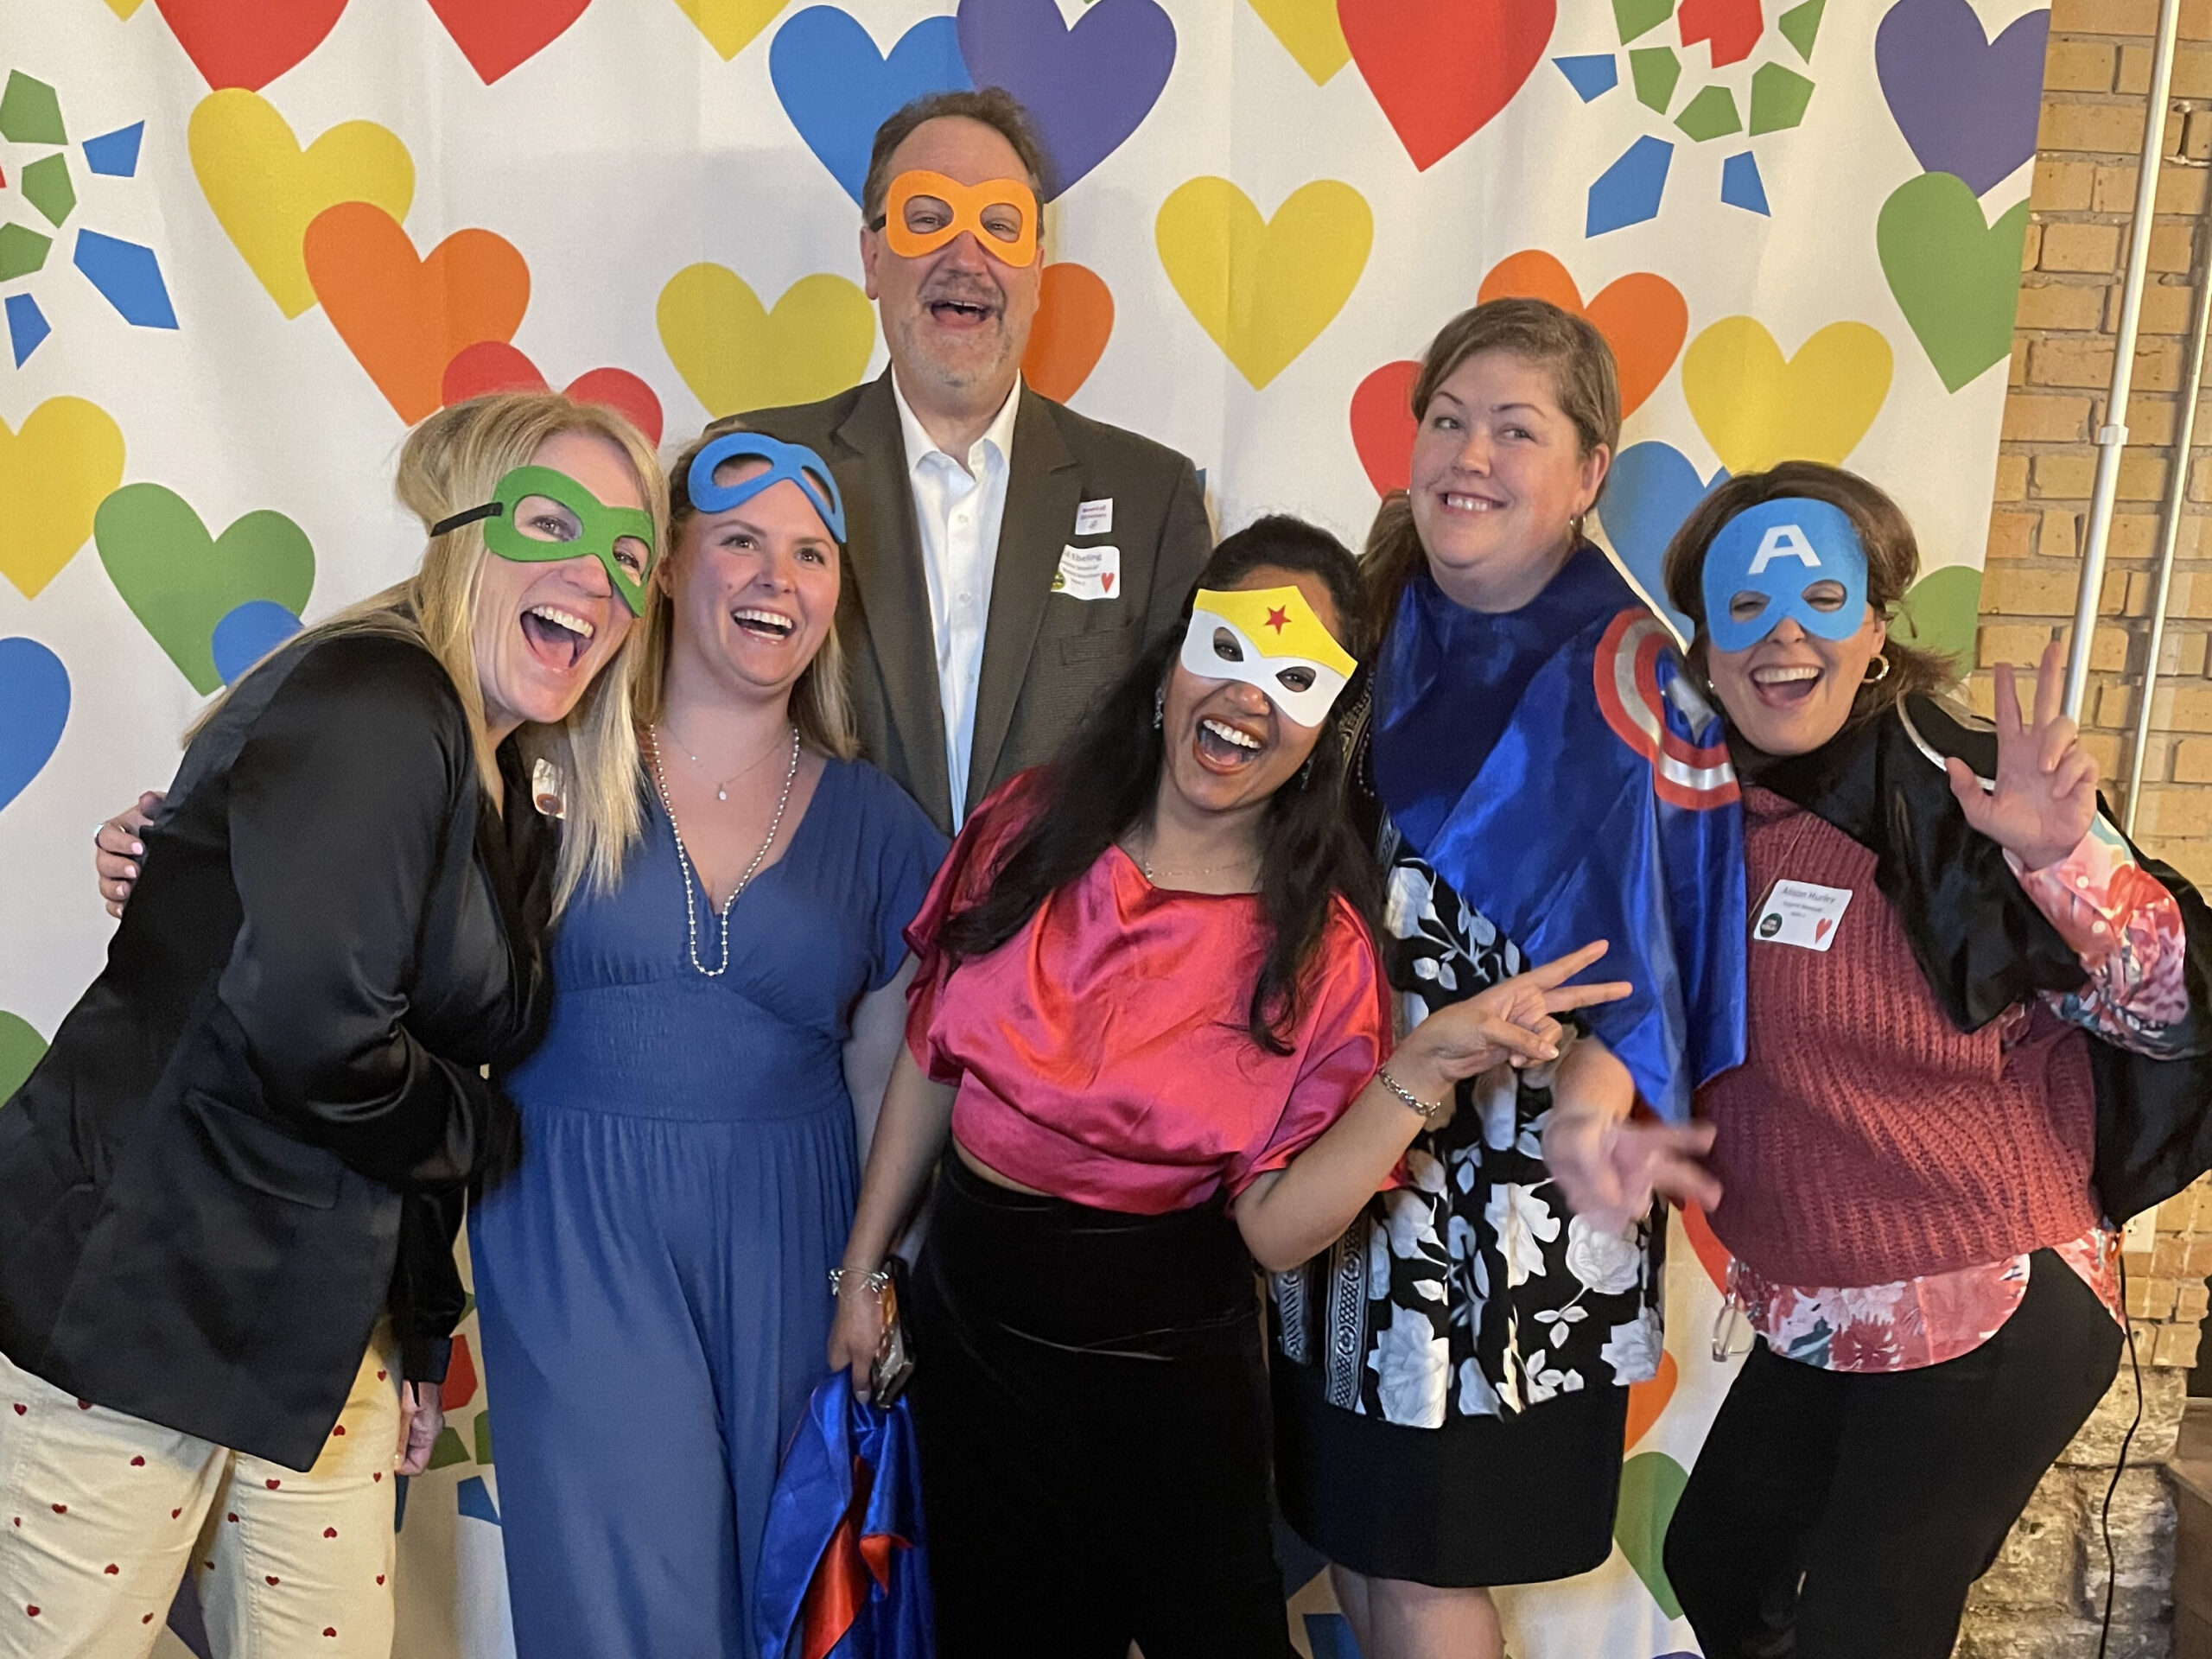 Benefit guests pose while wearing superhero capes and masks